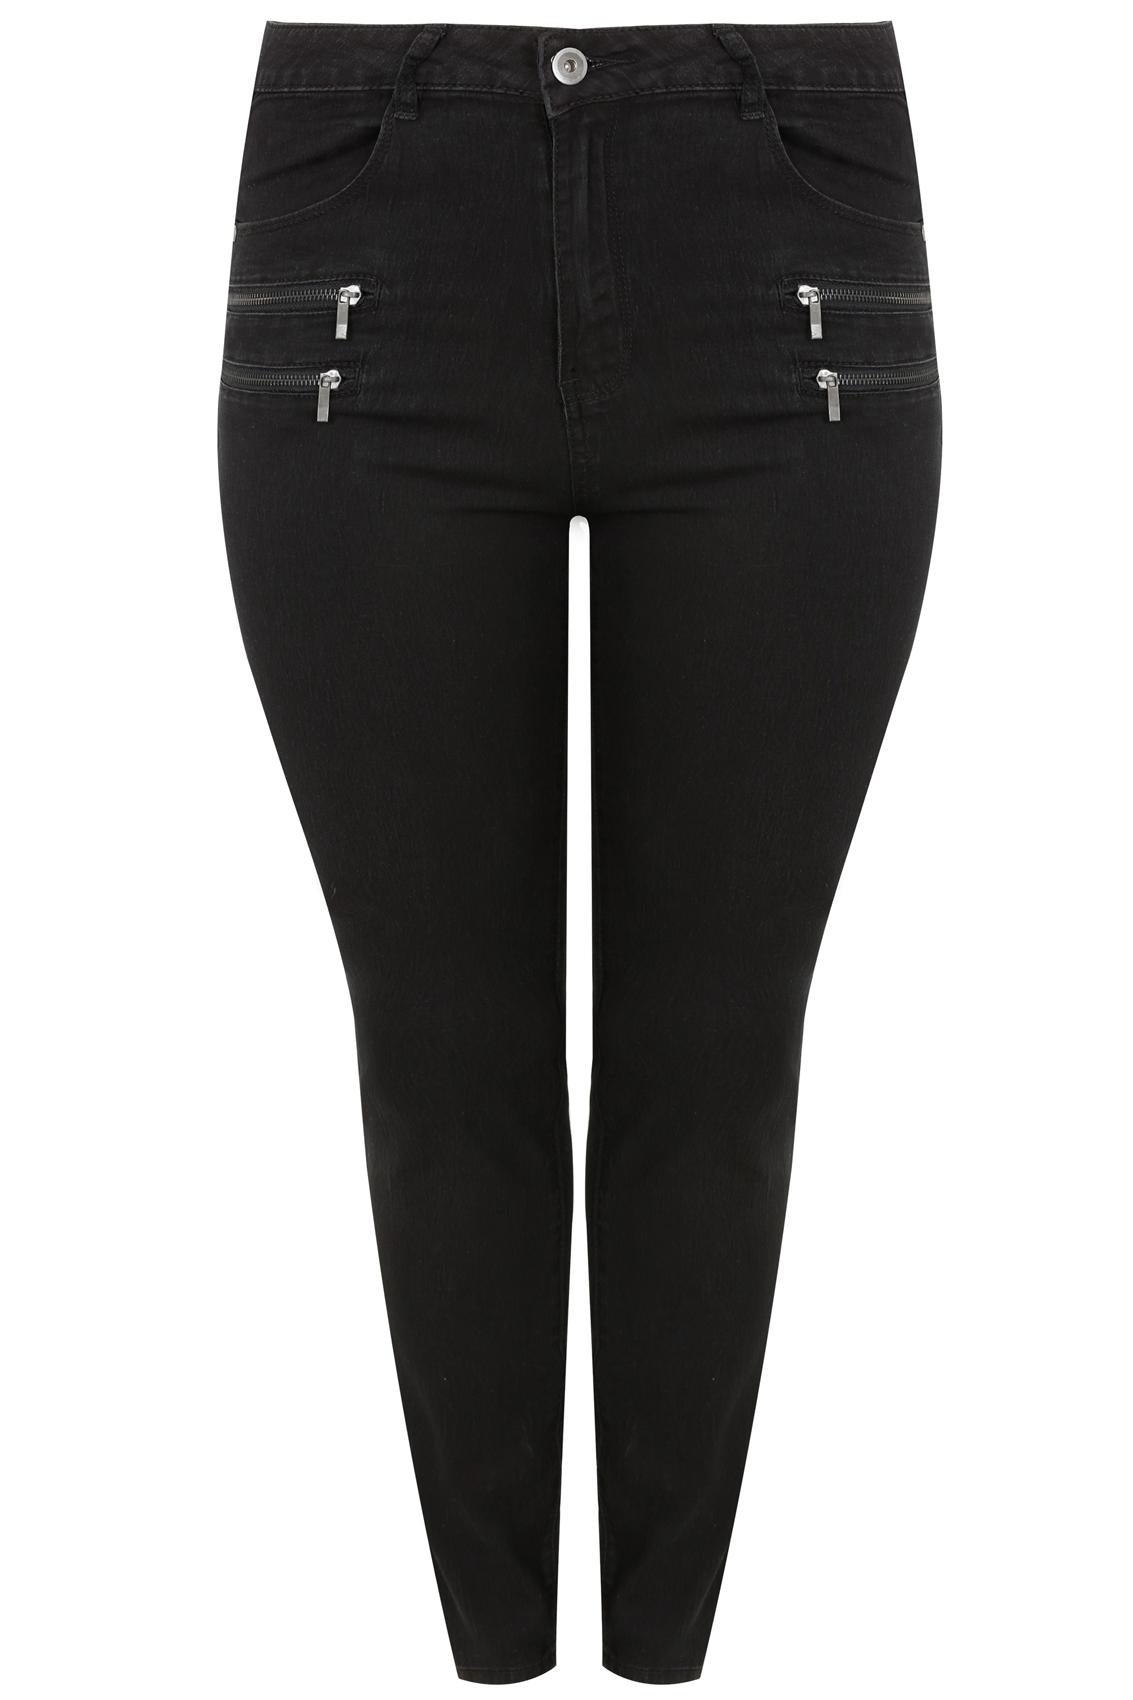 Limited Collection Black Skinny Jeans With Double Zip Detail Plus Size